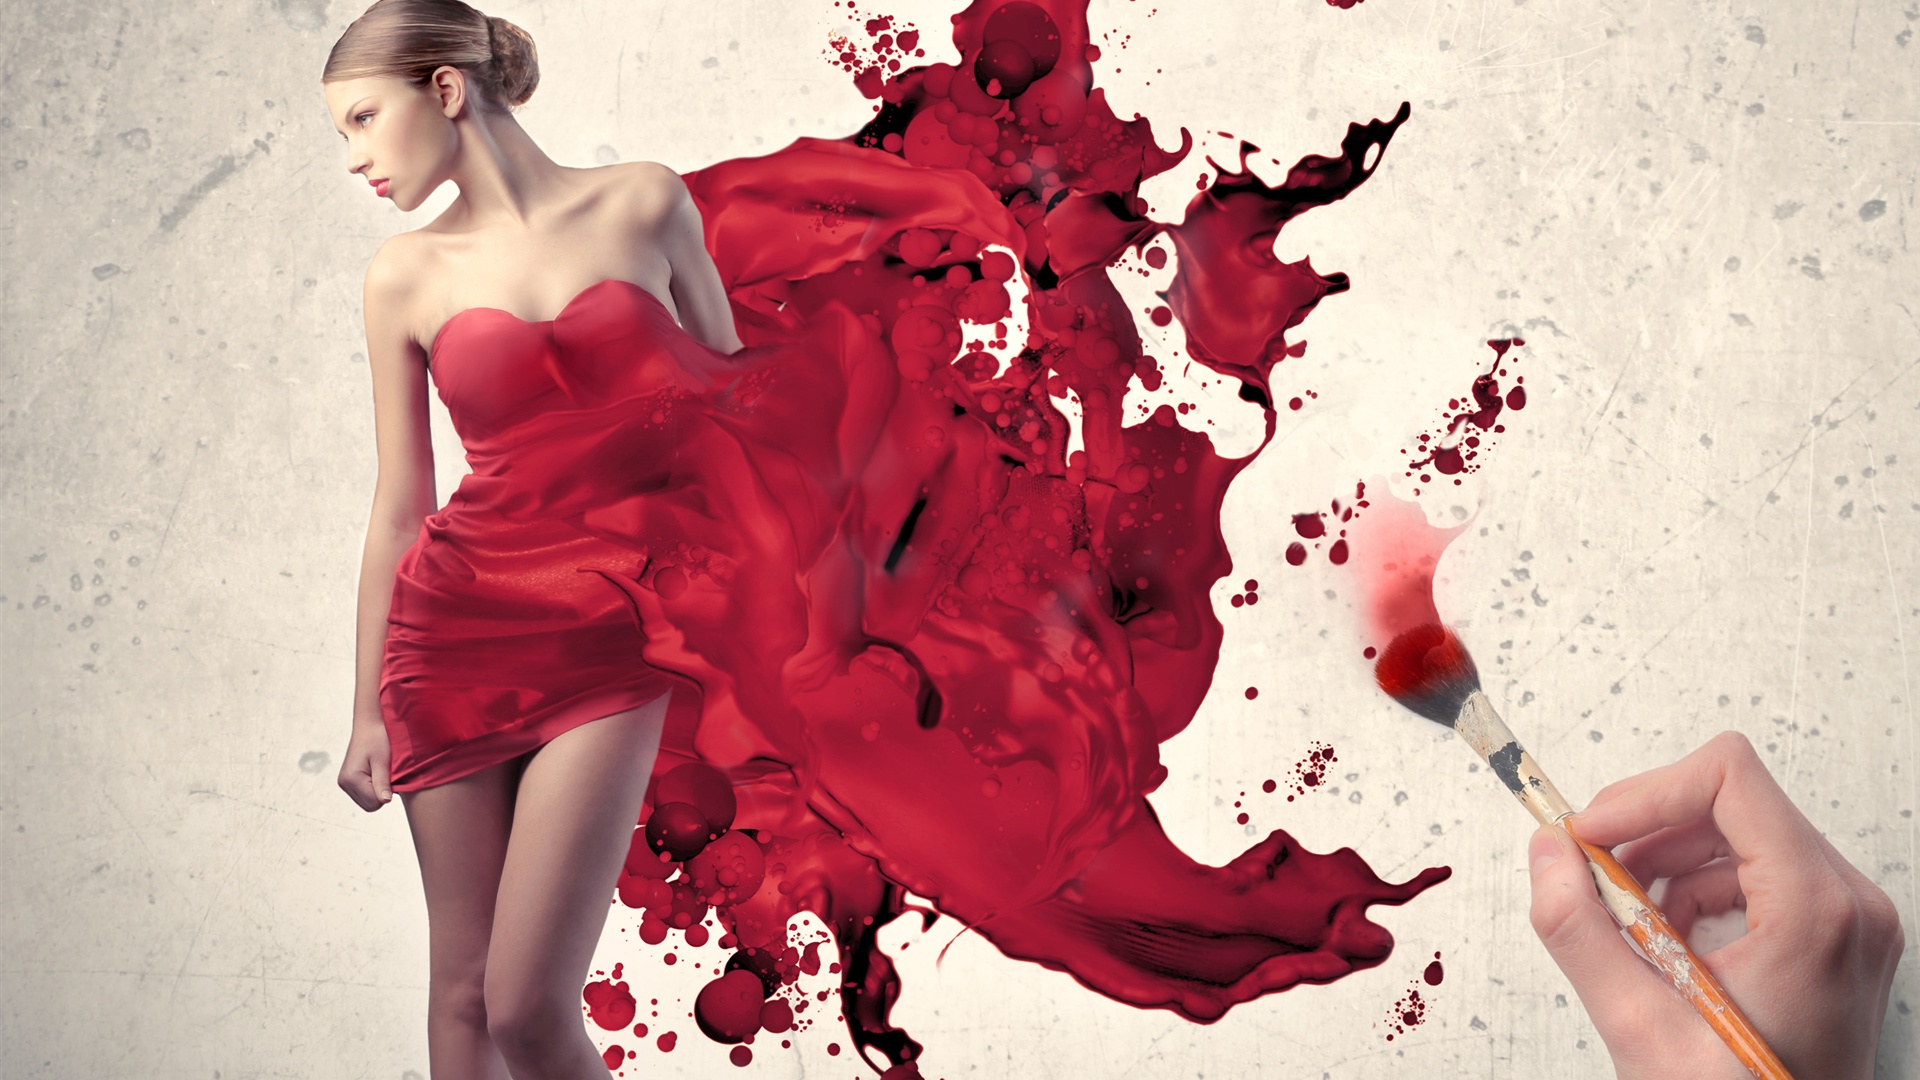 Red Dress HD Wallpaper Background Image